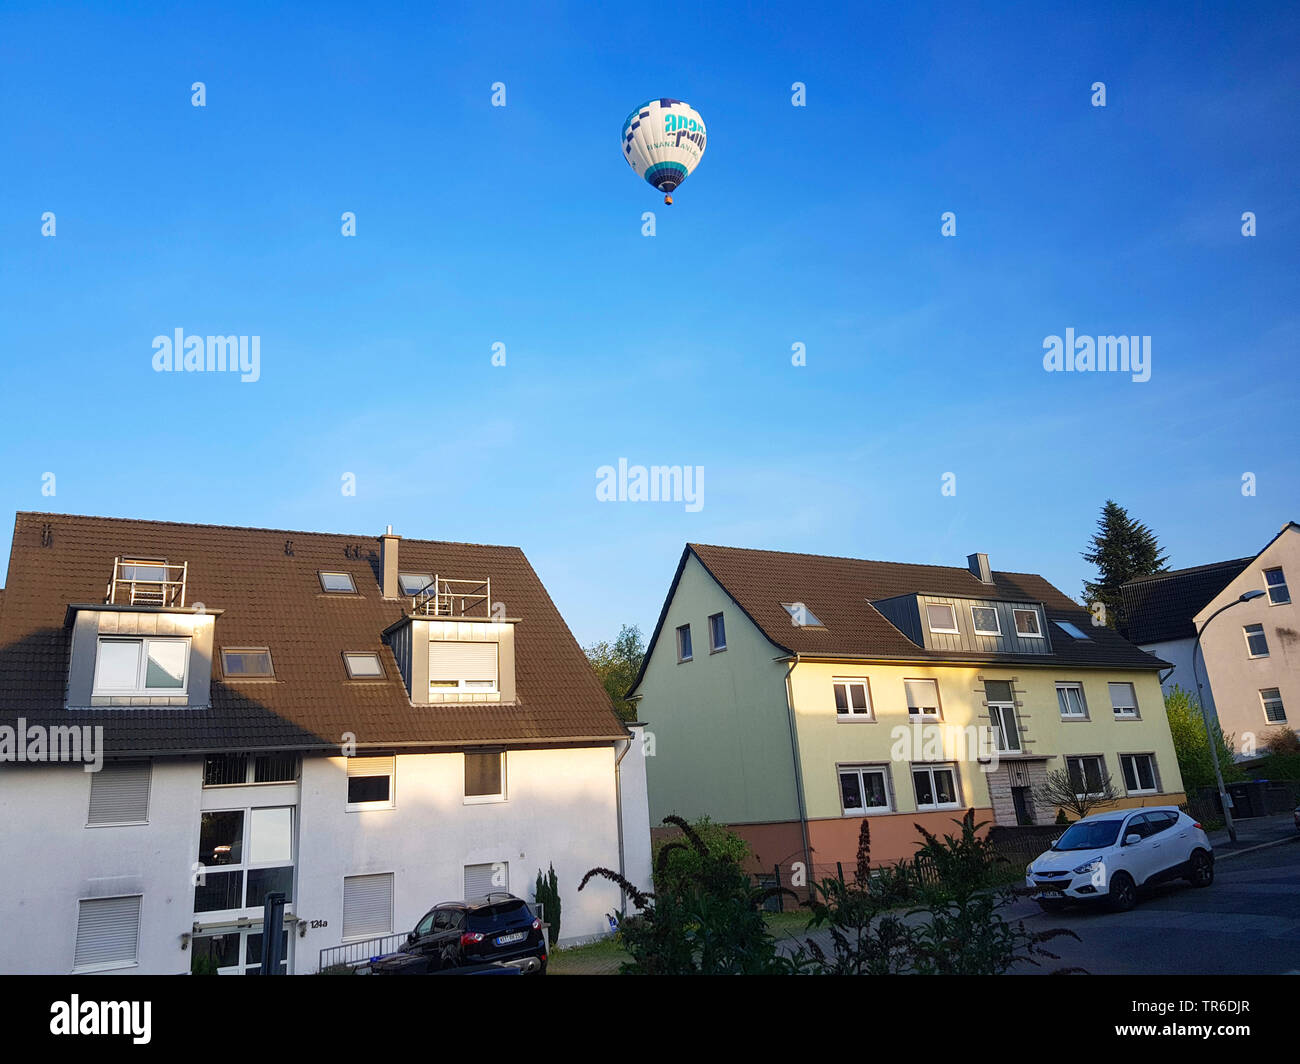 hotair baloon over a city, Germany, North Rhine-Westphalia, Ruhr Area, Witten Stock Photo